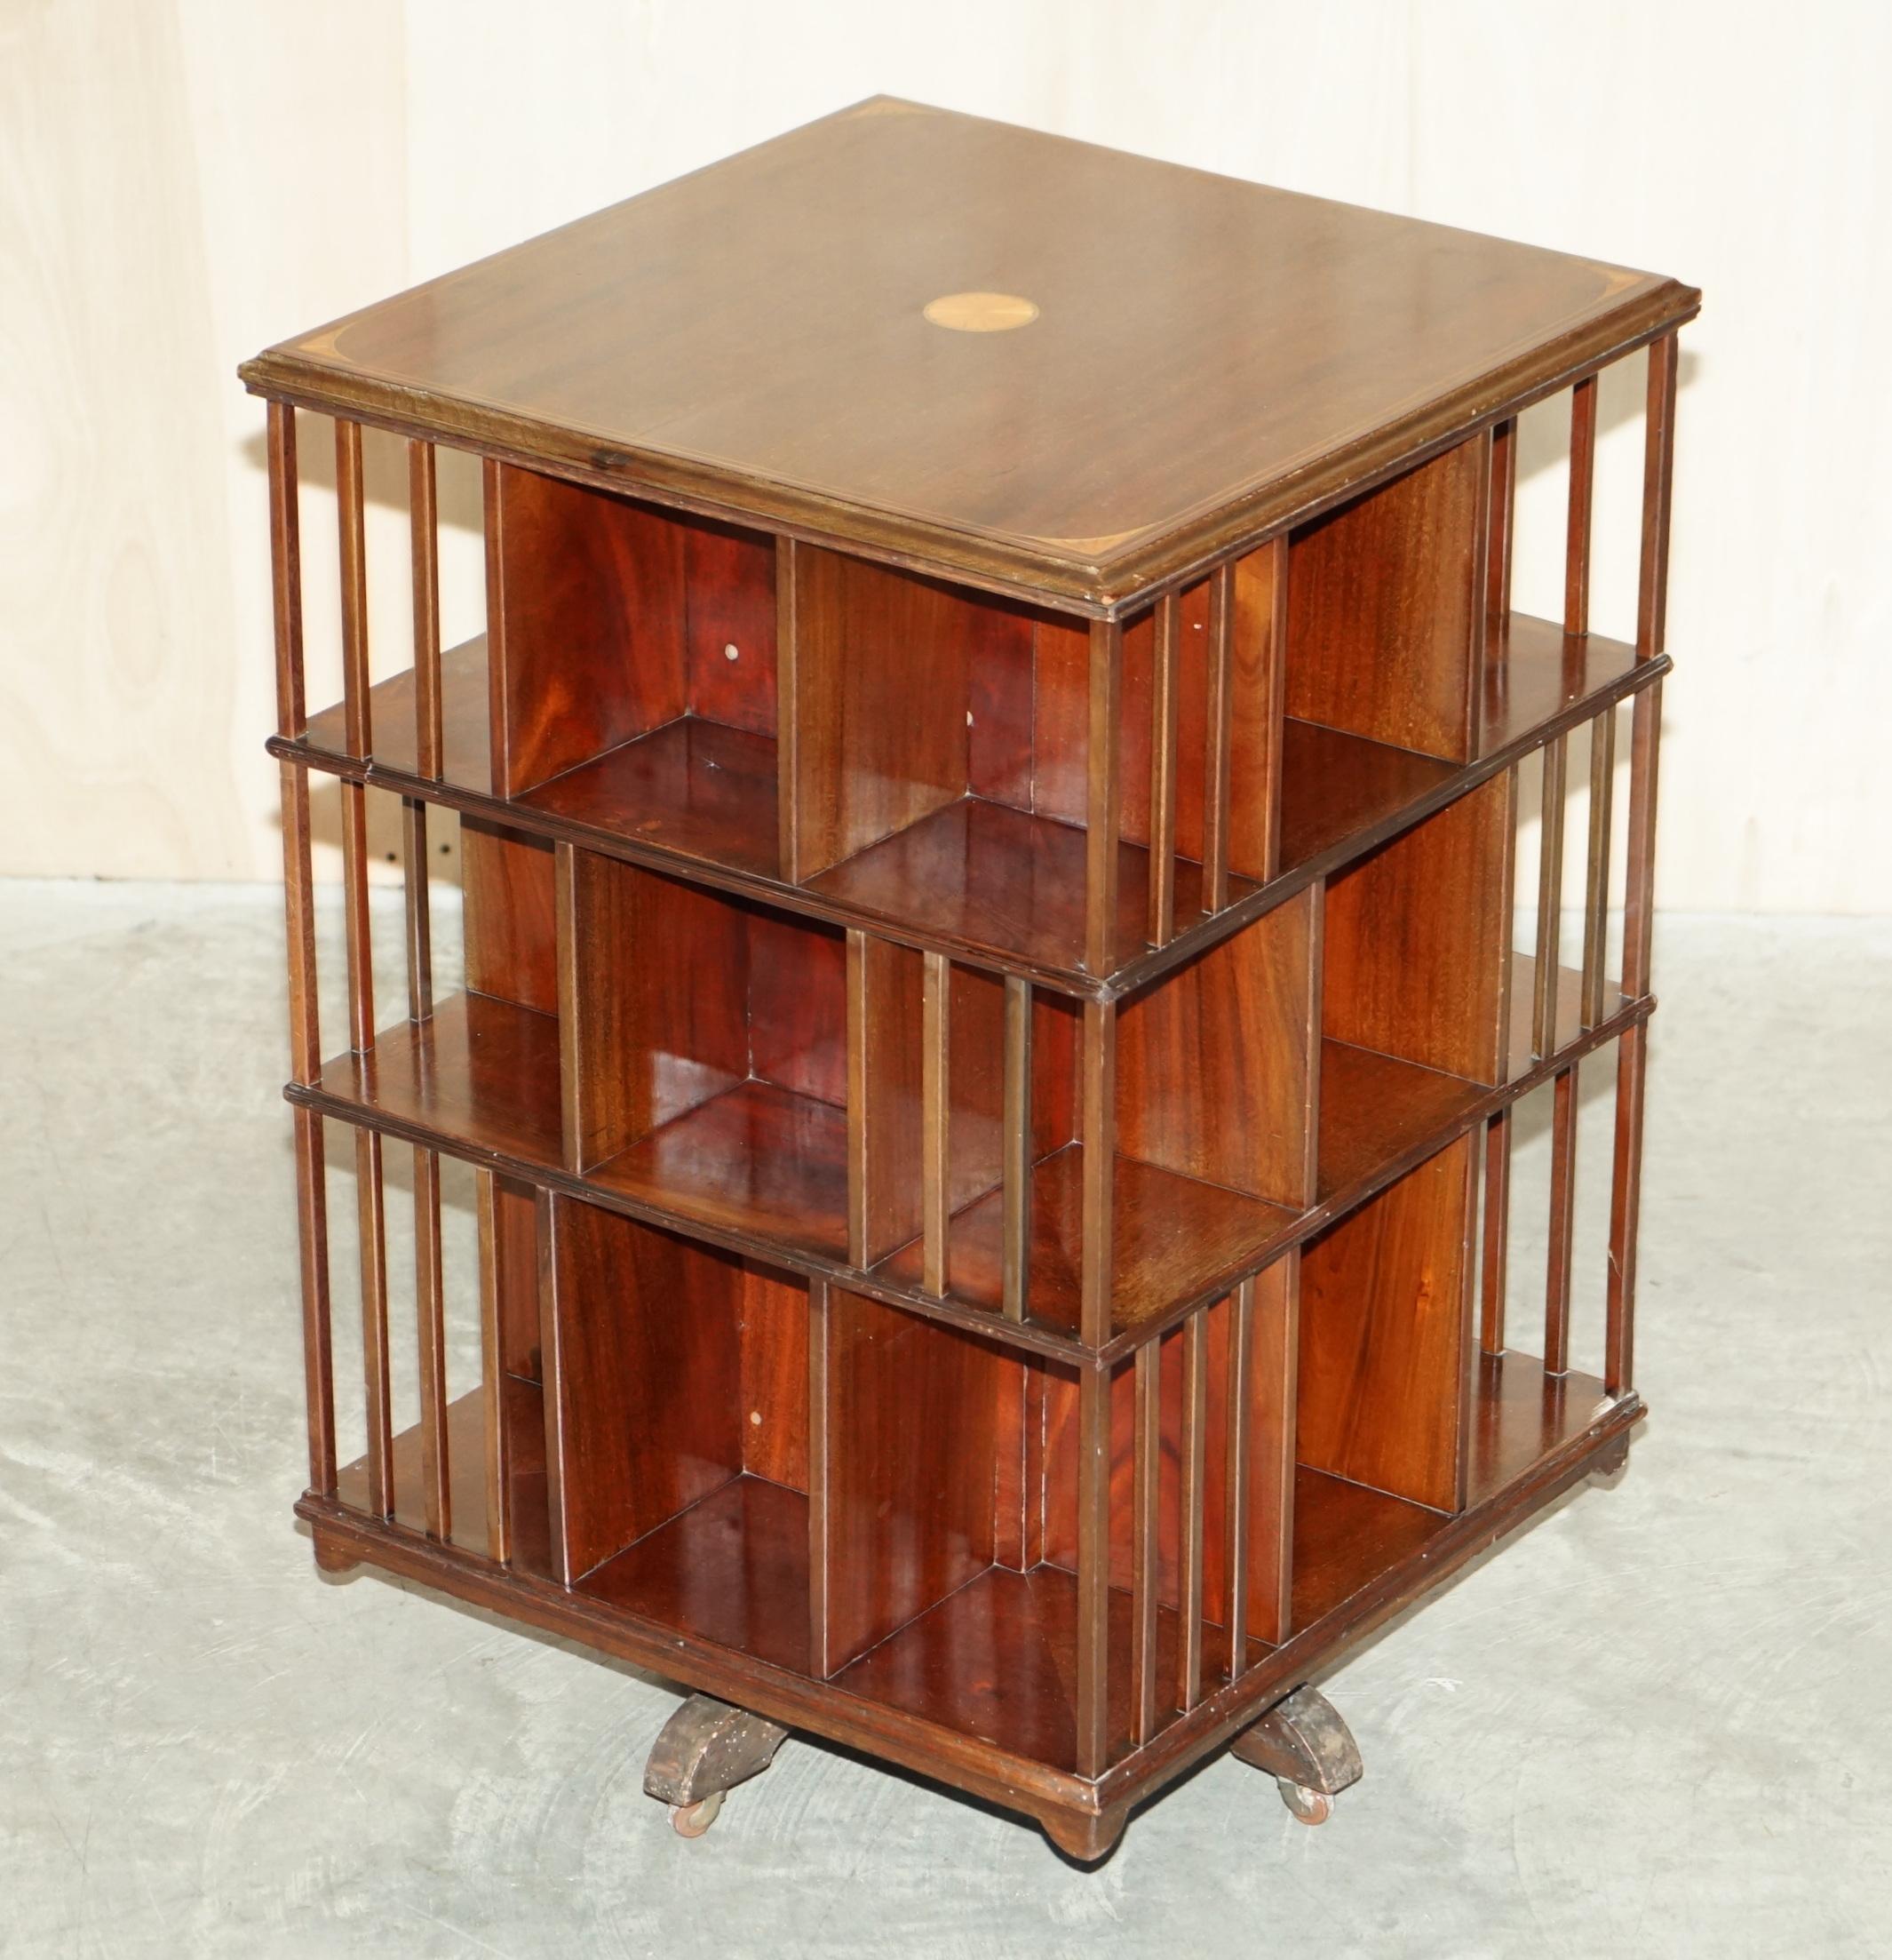 We are delighted to offer for sale this very fine, extra large, antique Sheraton Revival Mahogany & Satinwood revolving bookcase table

A very good looking well made and decorative piece. Made in the Sheraton revival style with wonderful inlay and